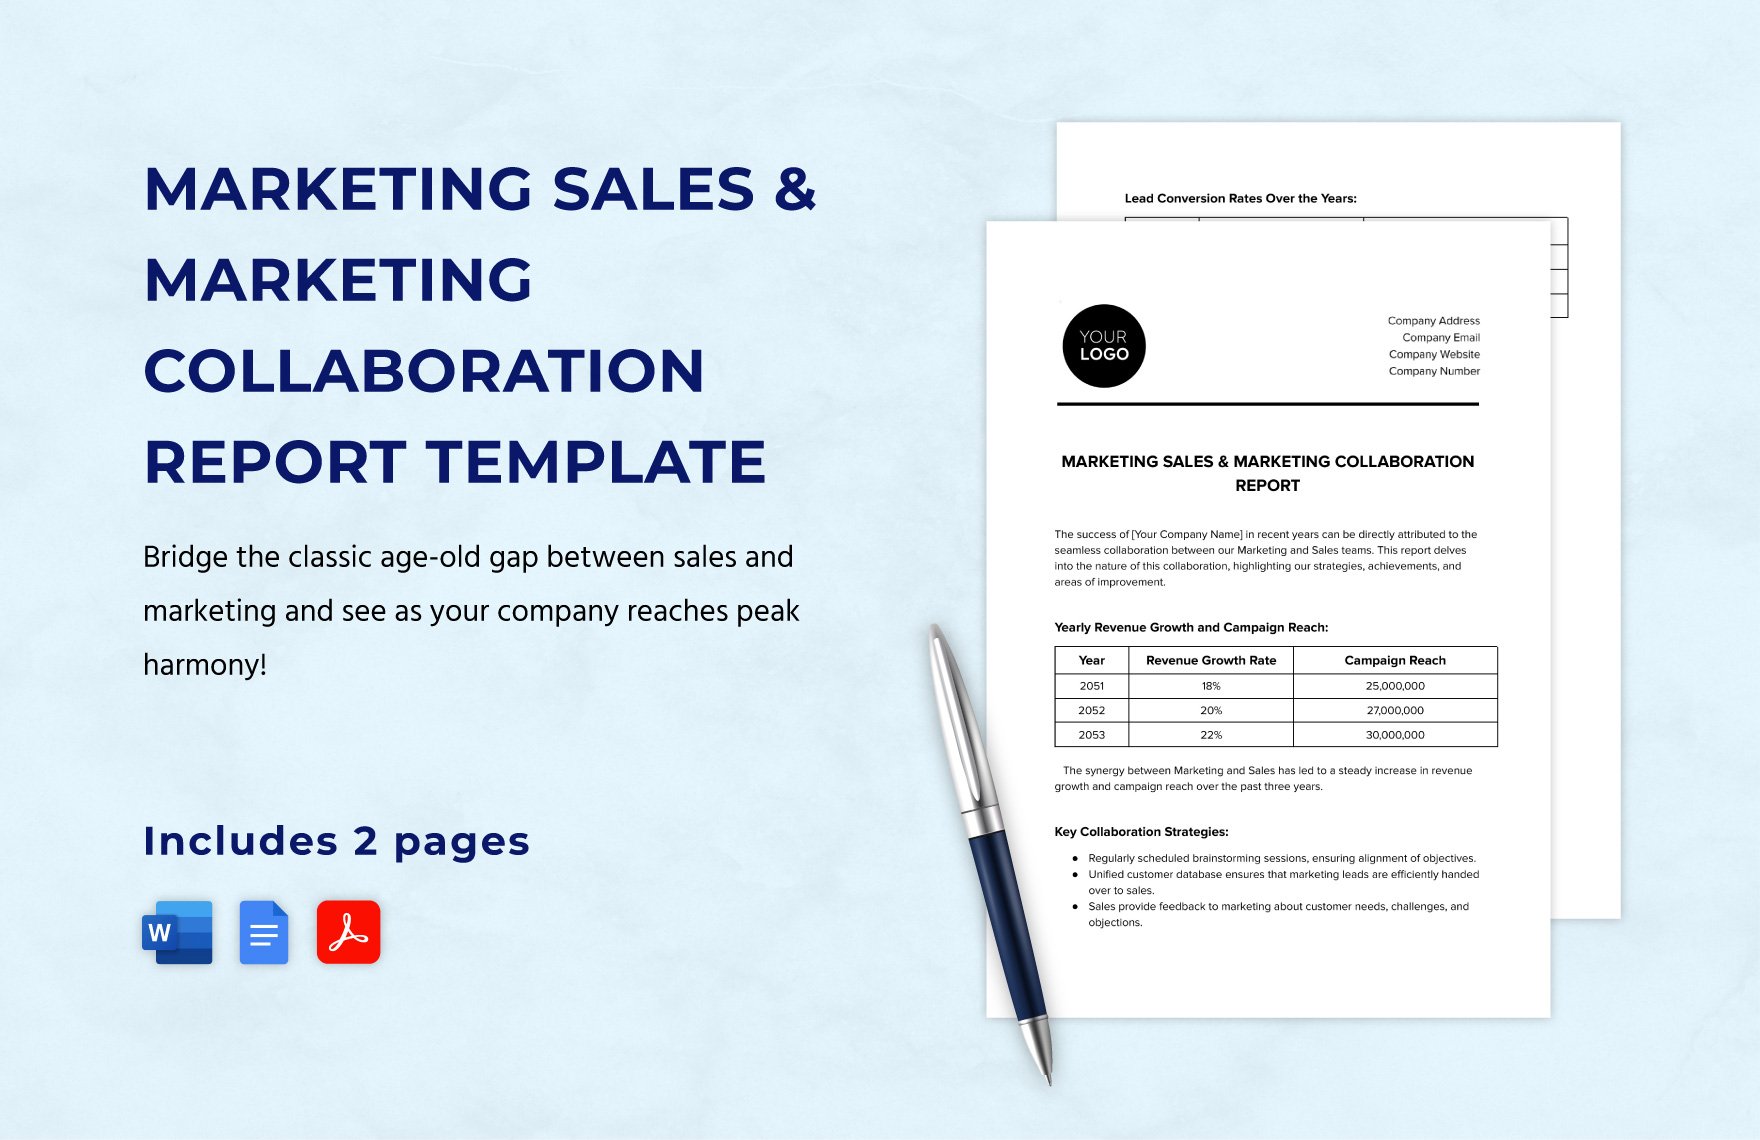 Marketing Sales & Marketing Collaboration Report Template in Word, Google Docs, PDF